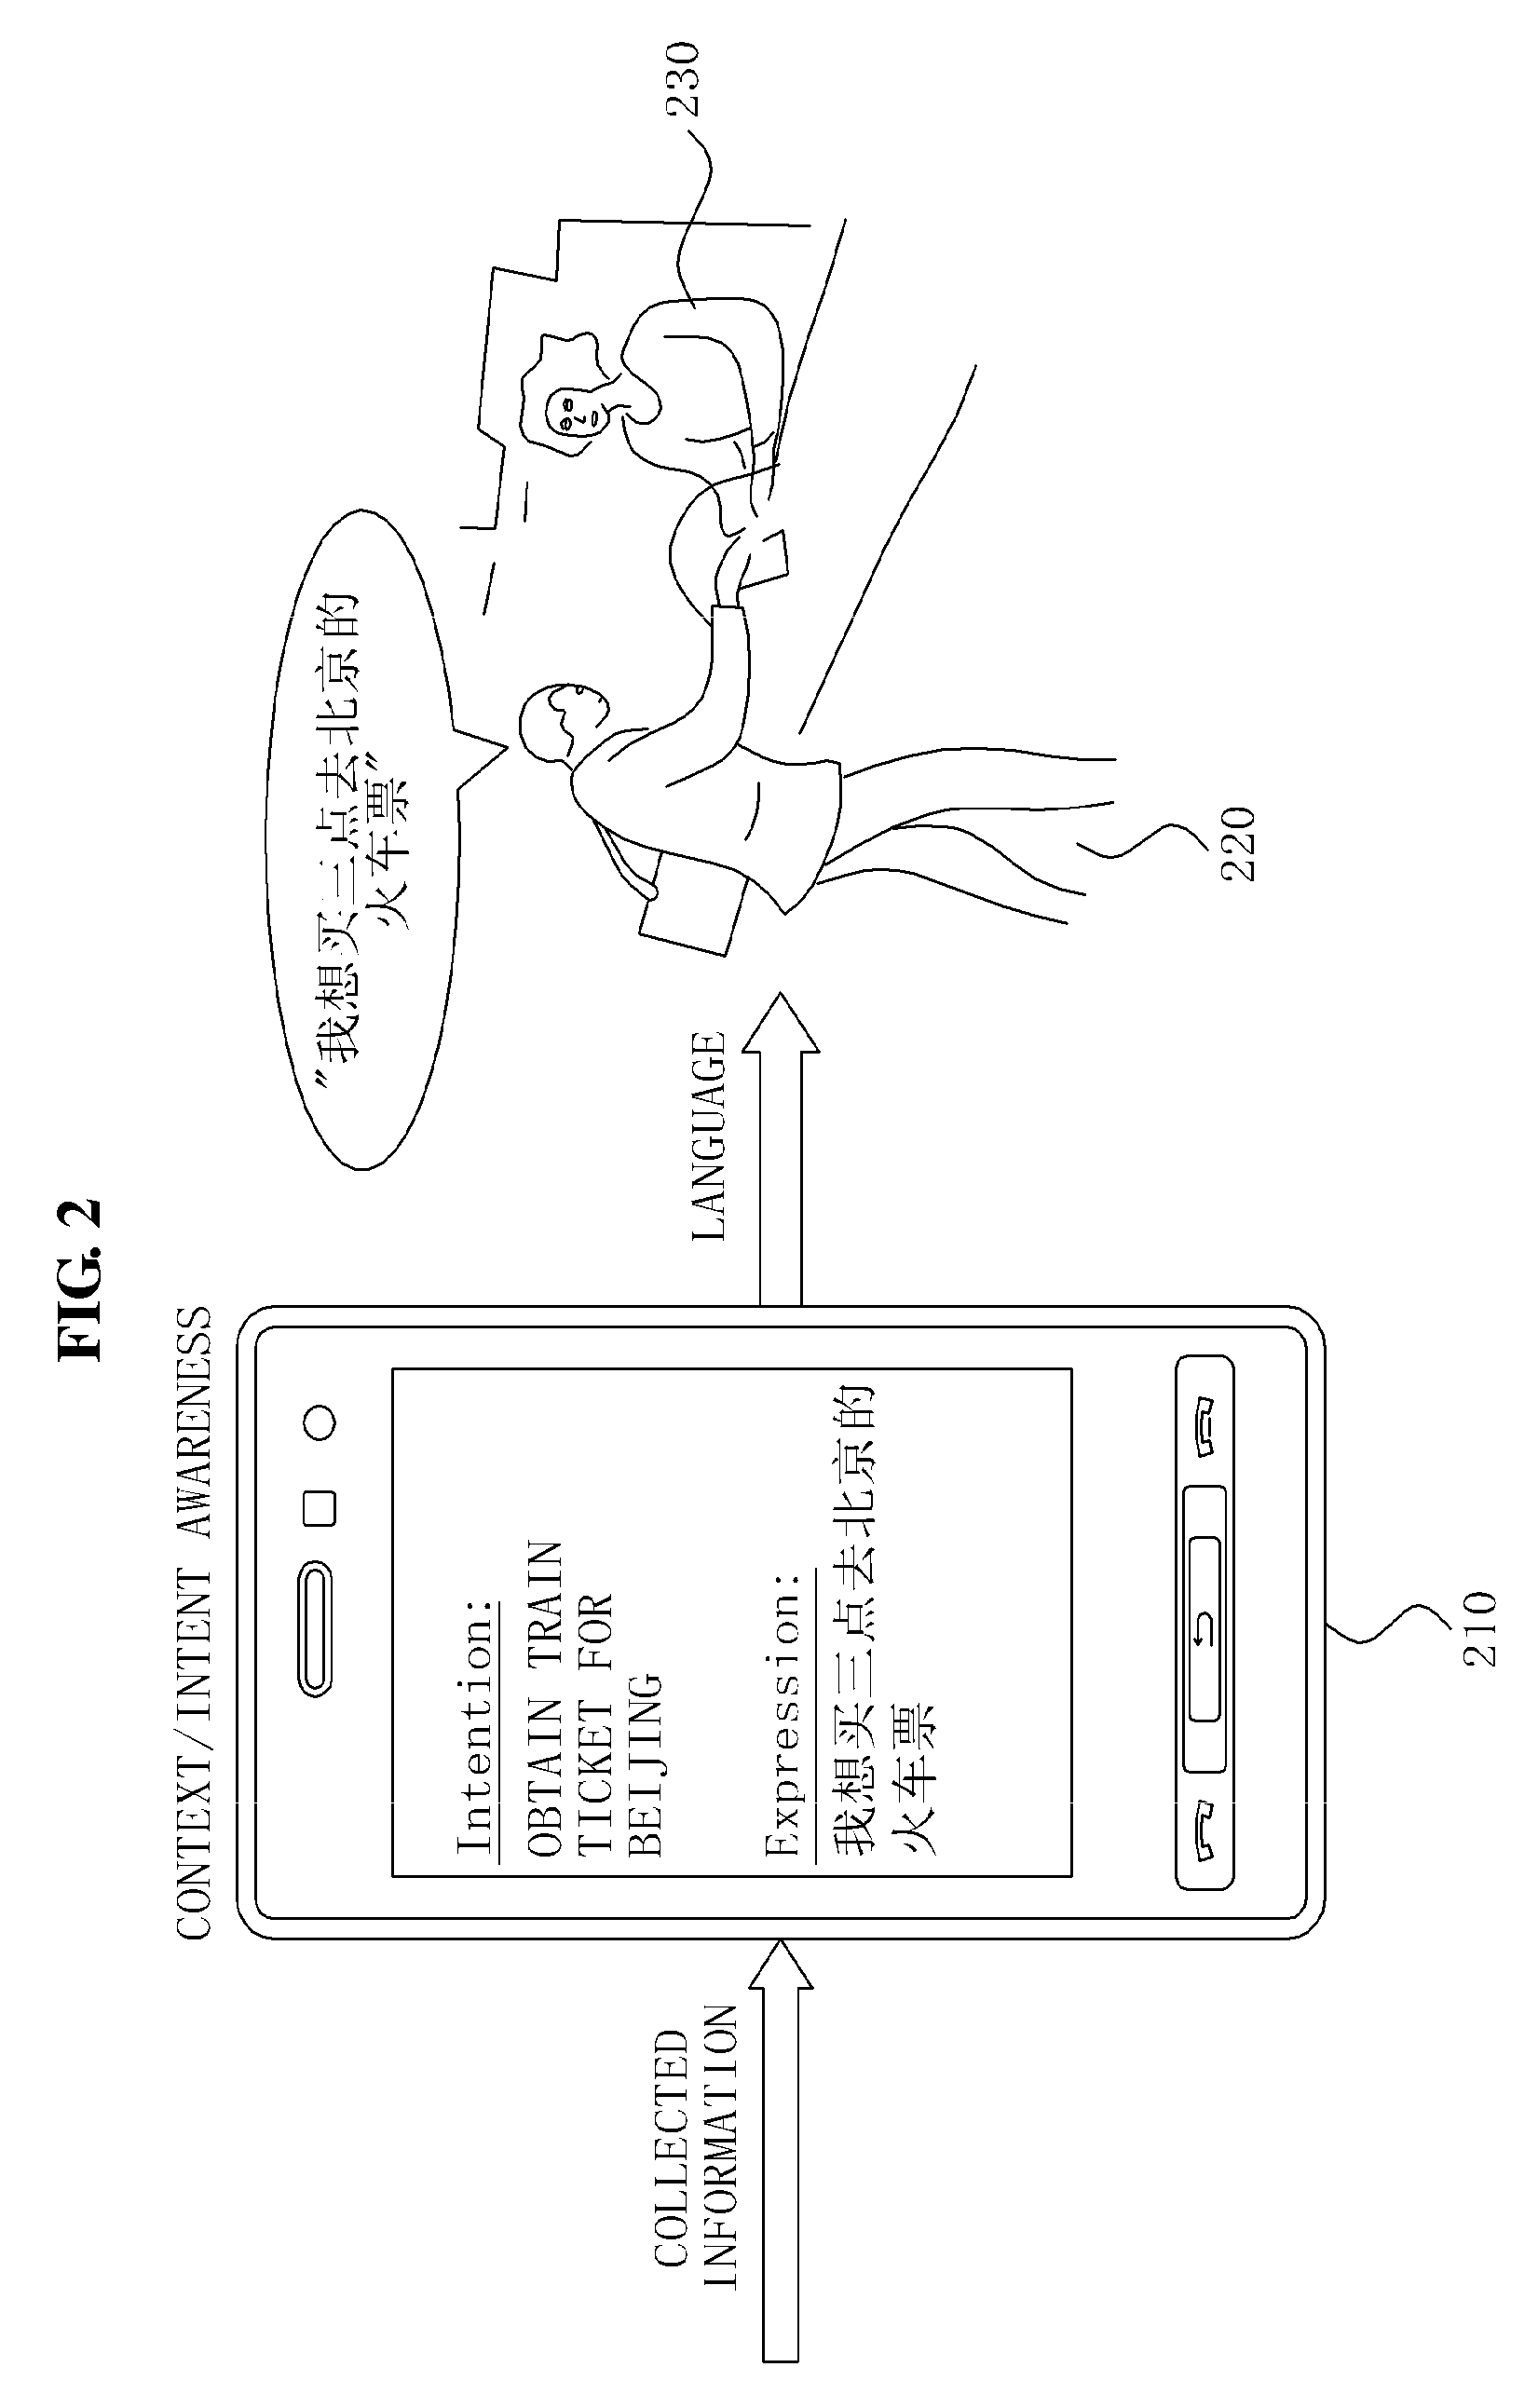 Apparatus and method for language expression using context and intent awareness